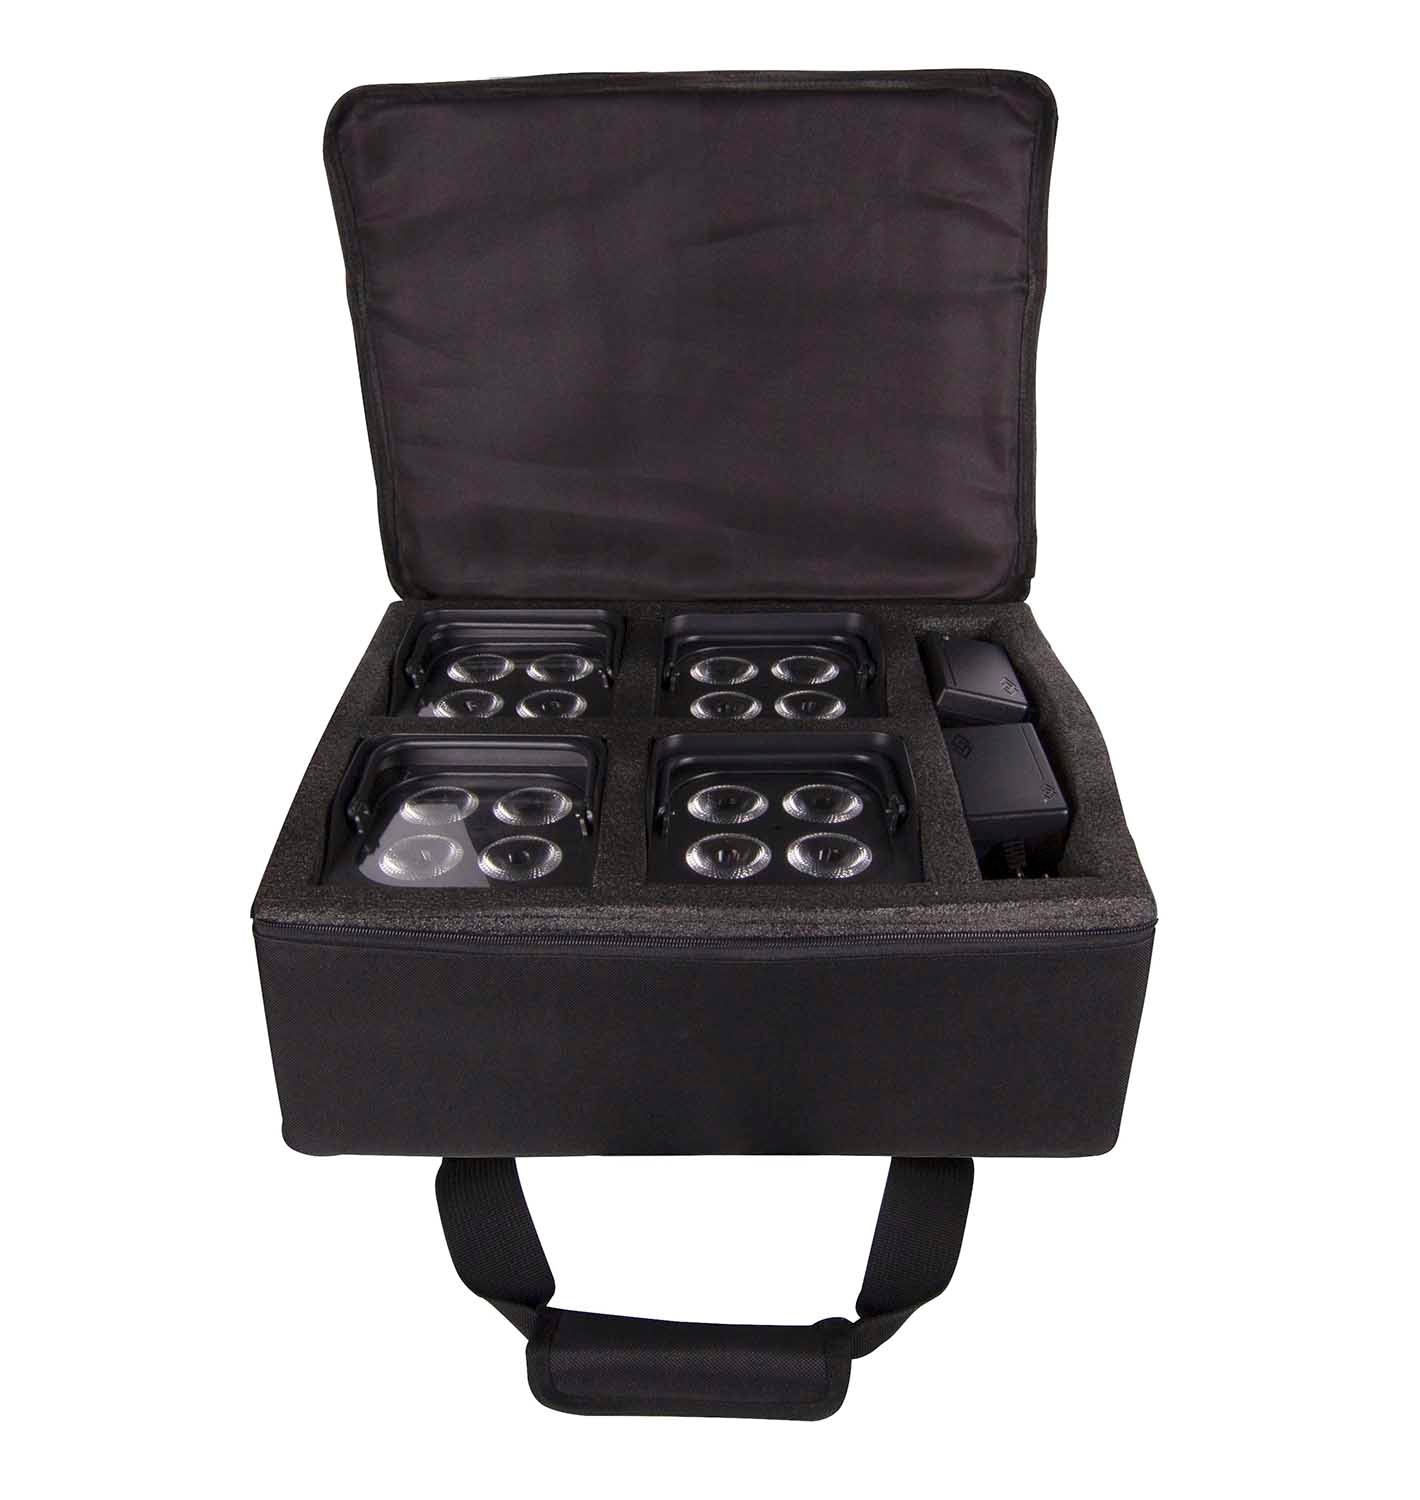 B-Stock: Colorkey CKW-6020 MobilePar Mini Hex 4 Bundle with Carrying Case - 4-Pack - Hollywood DJ